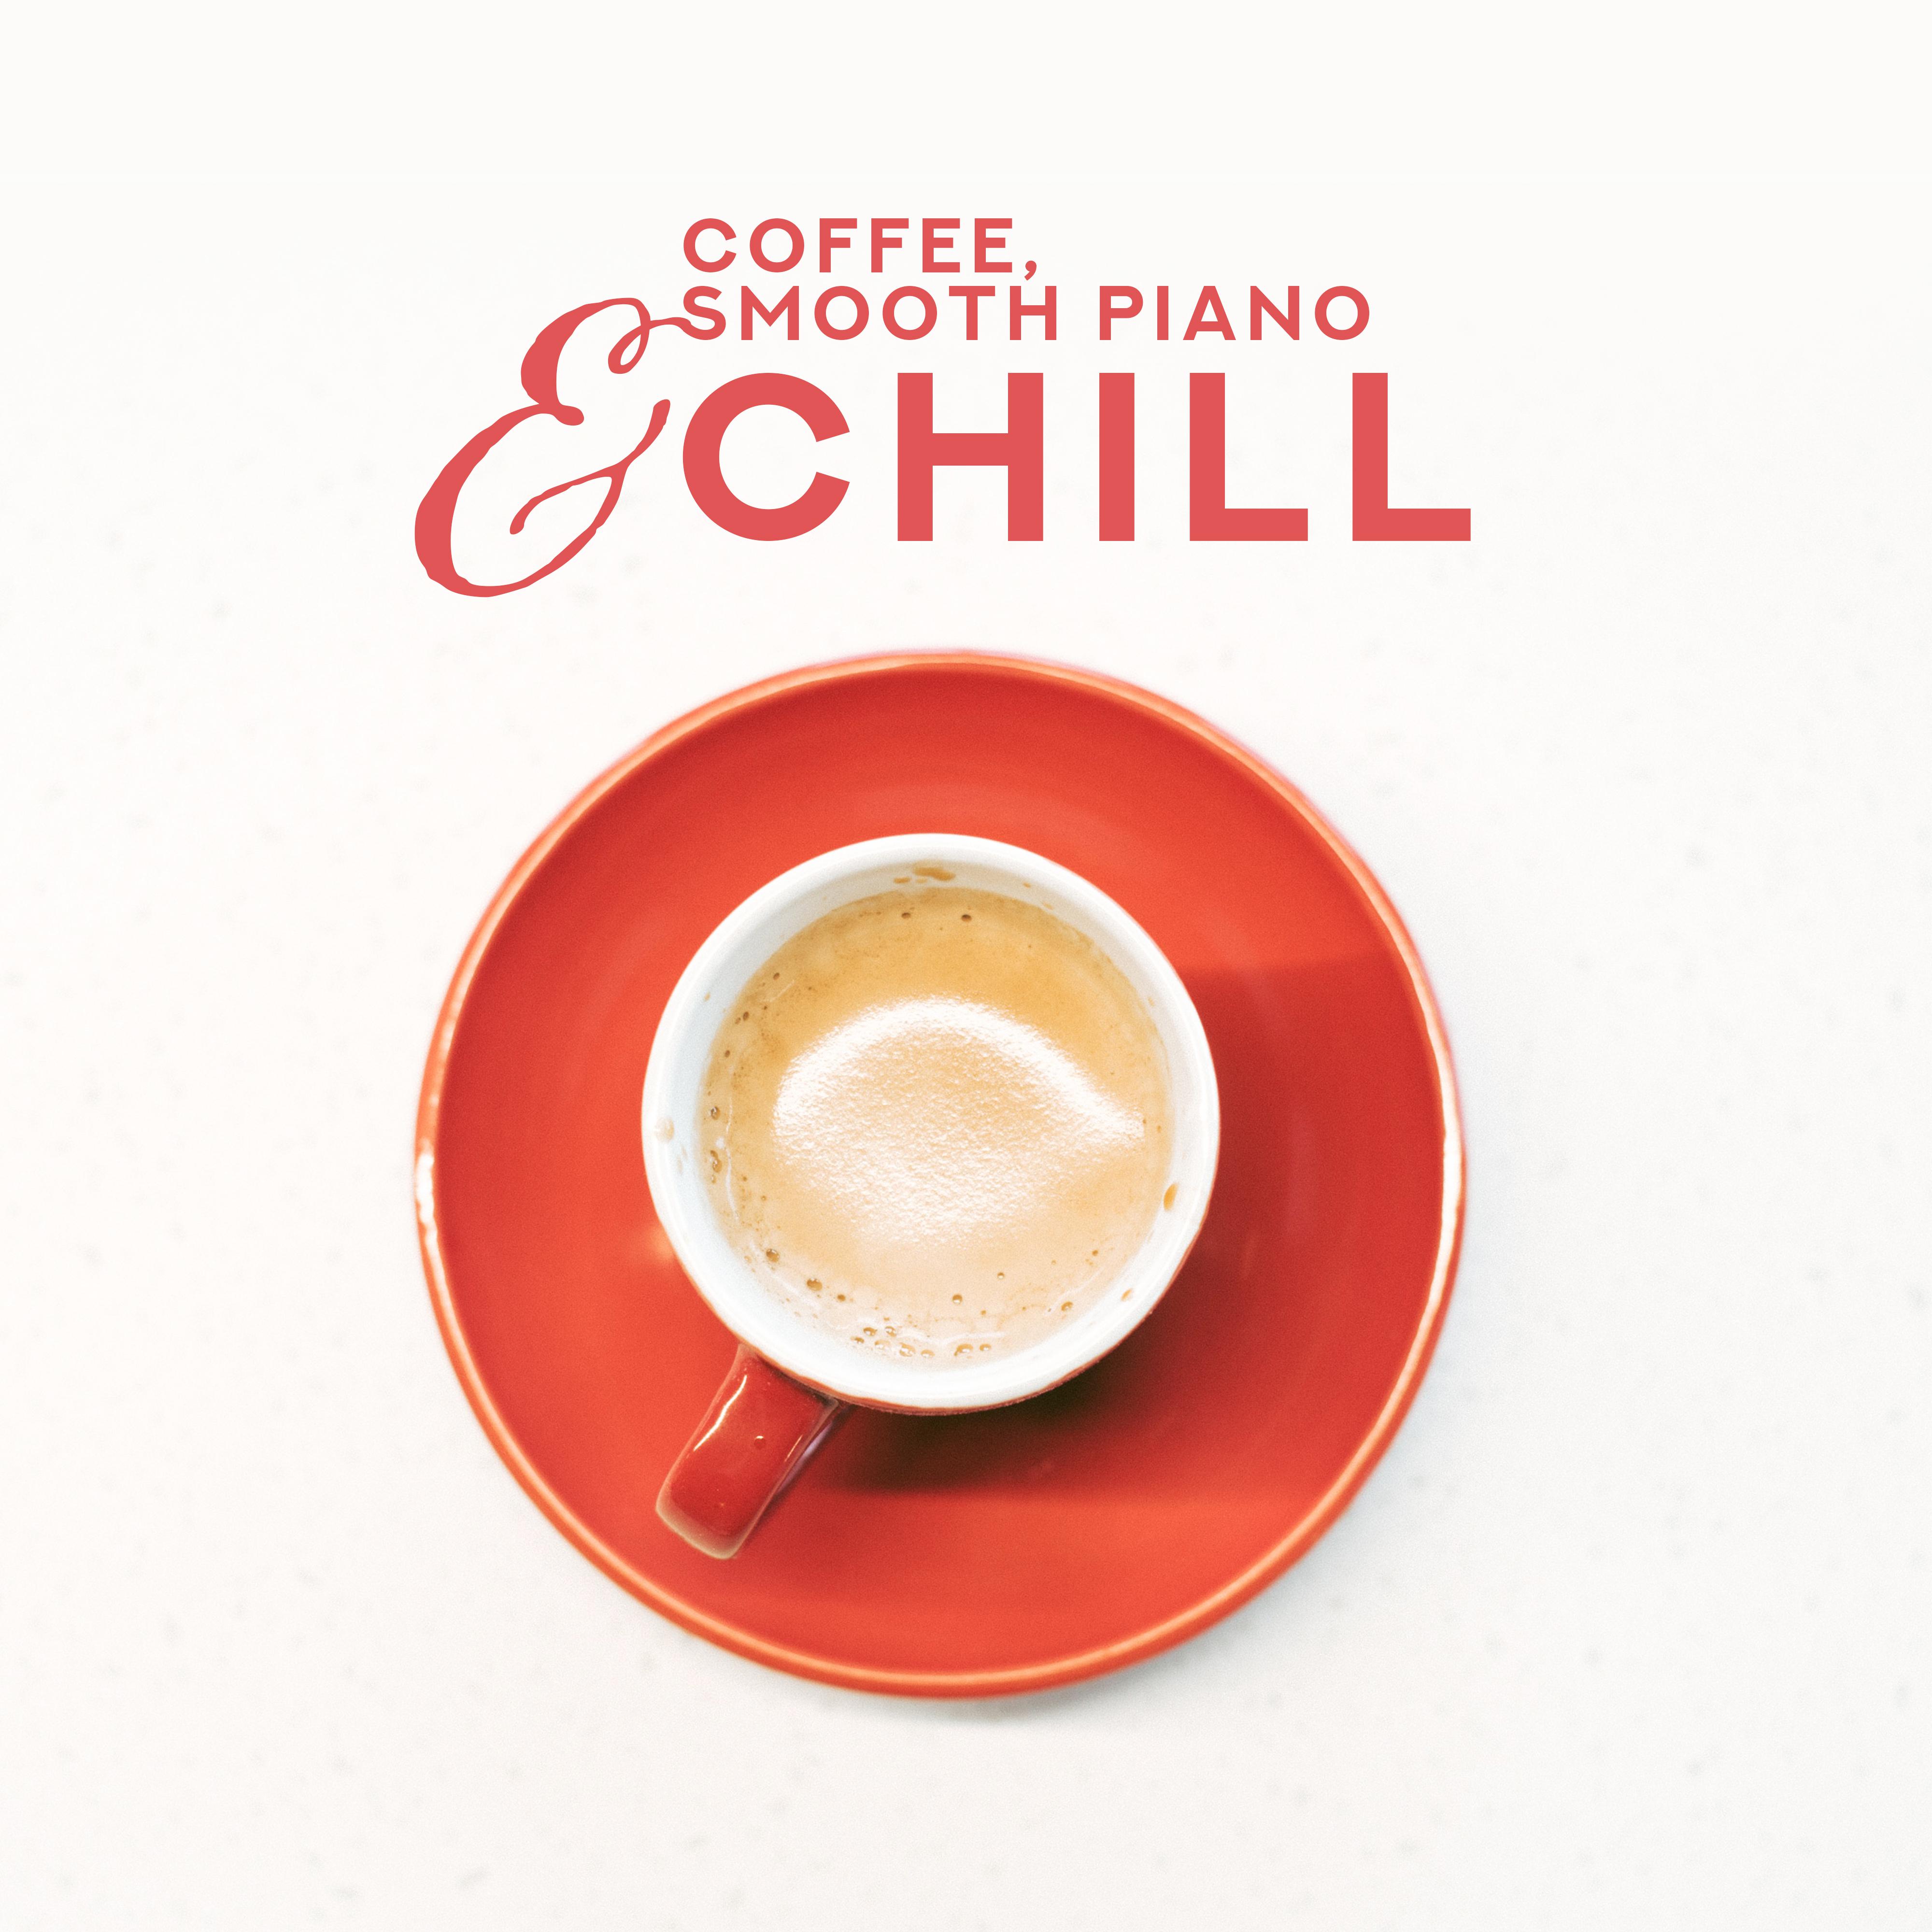 Coffee, Smooth Piano & Chill: Compilation of 15 Piano Jazz Songs for Best Afternoon Relax with Coffee